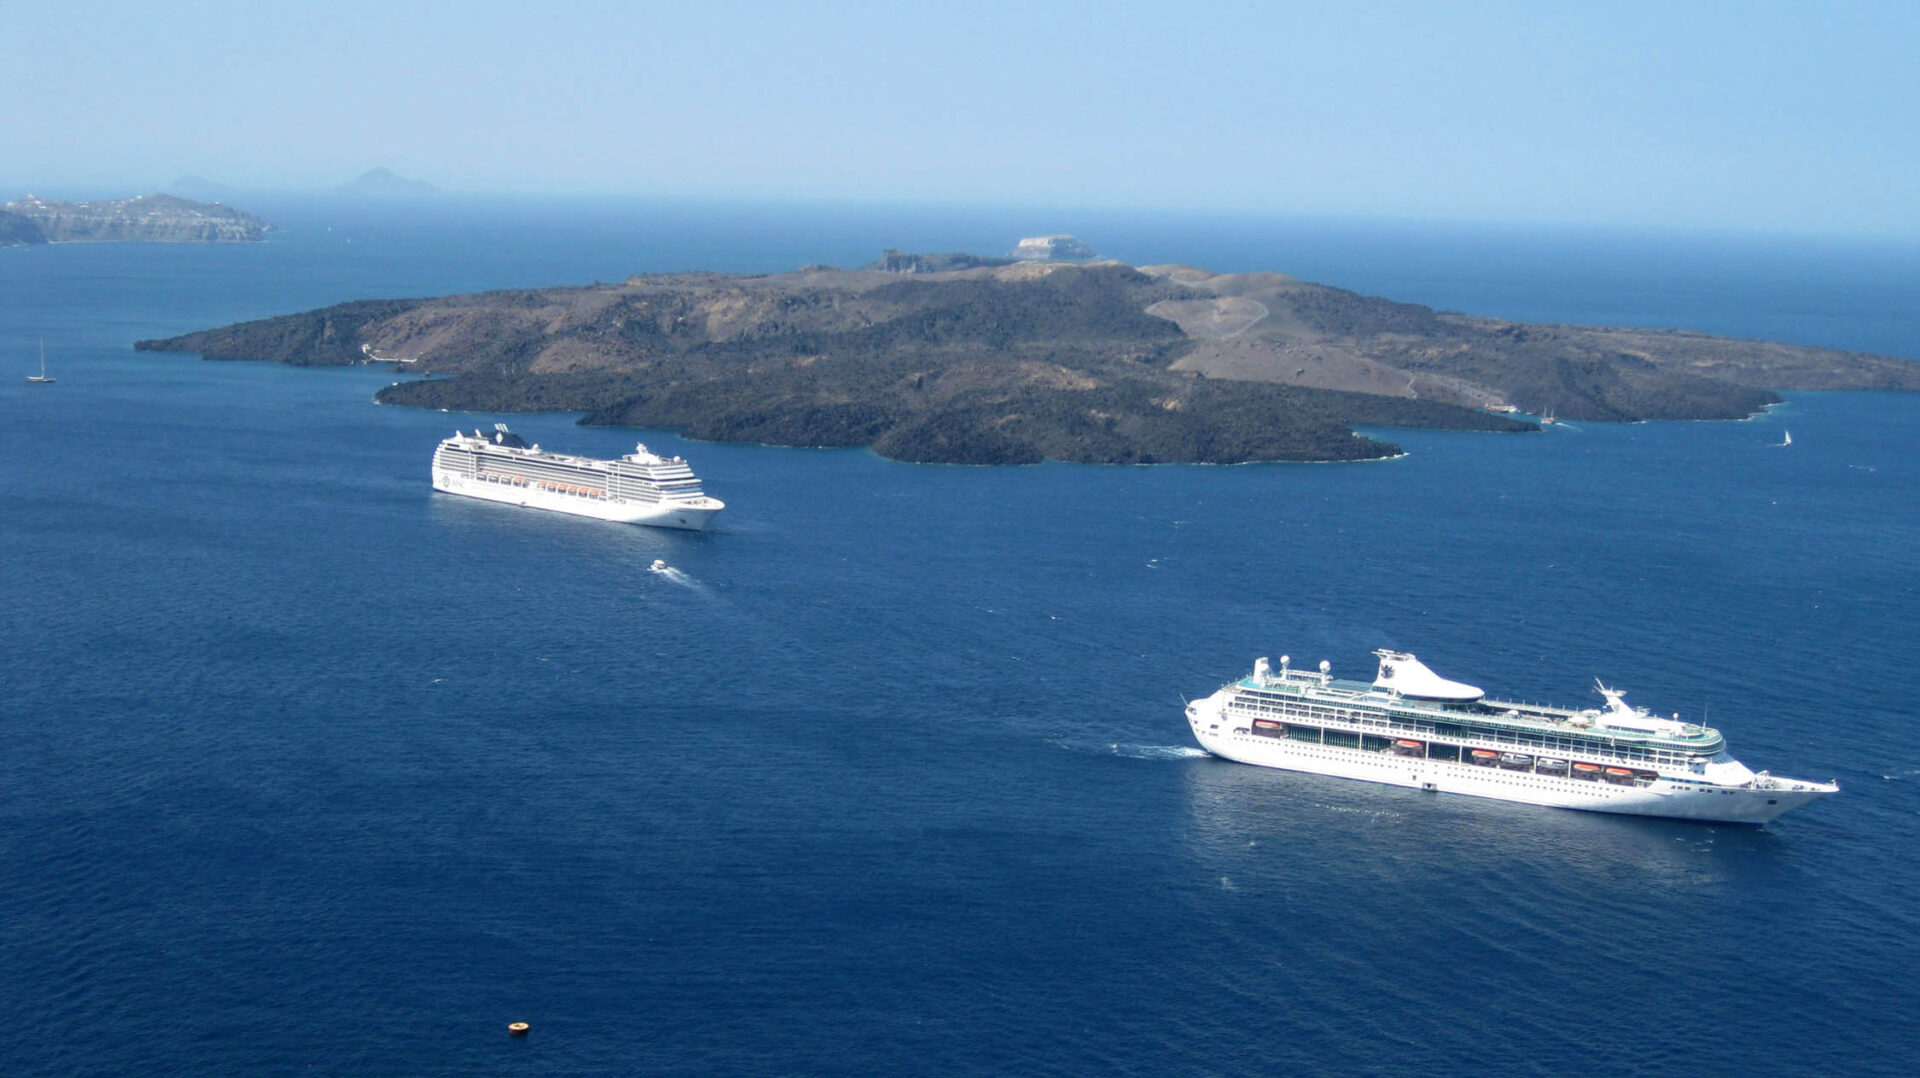 Cruise ships dock nearby Santorini, Greece, one of many ports in the Mediterranean Sea cruise guests visit each year. (U.S. Air Force photo/Staff Sgt. Lindsey Maurice)